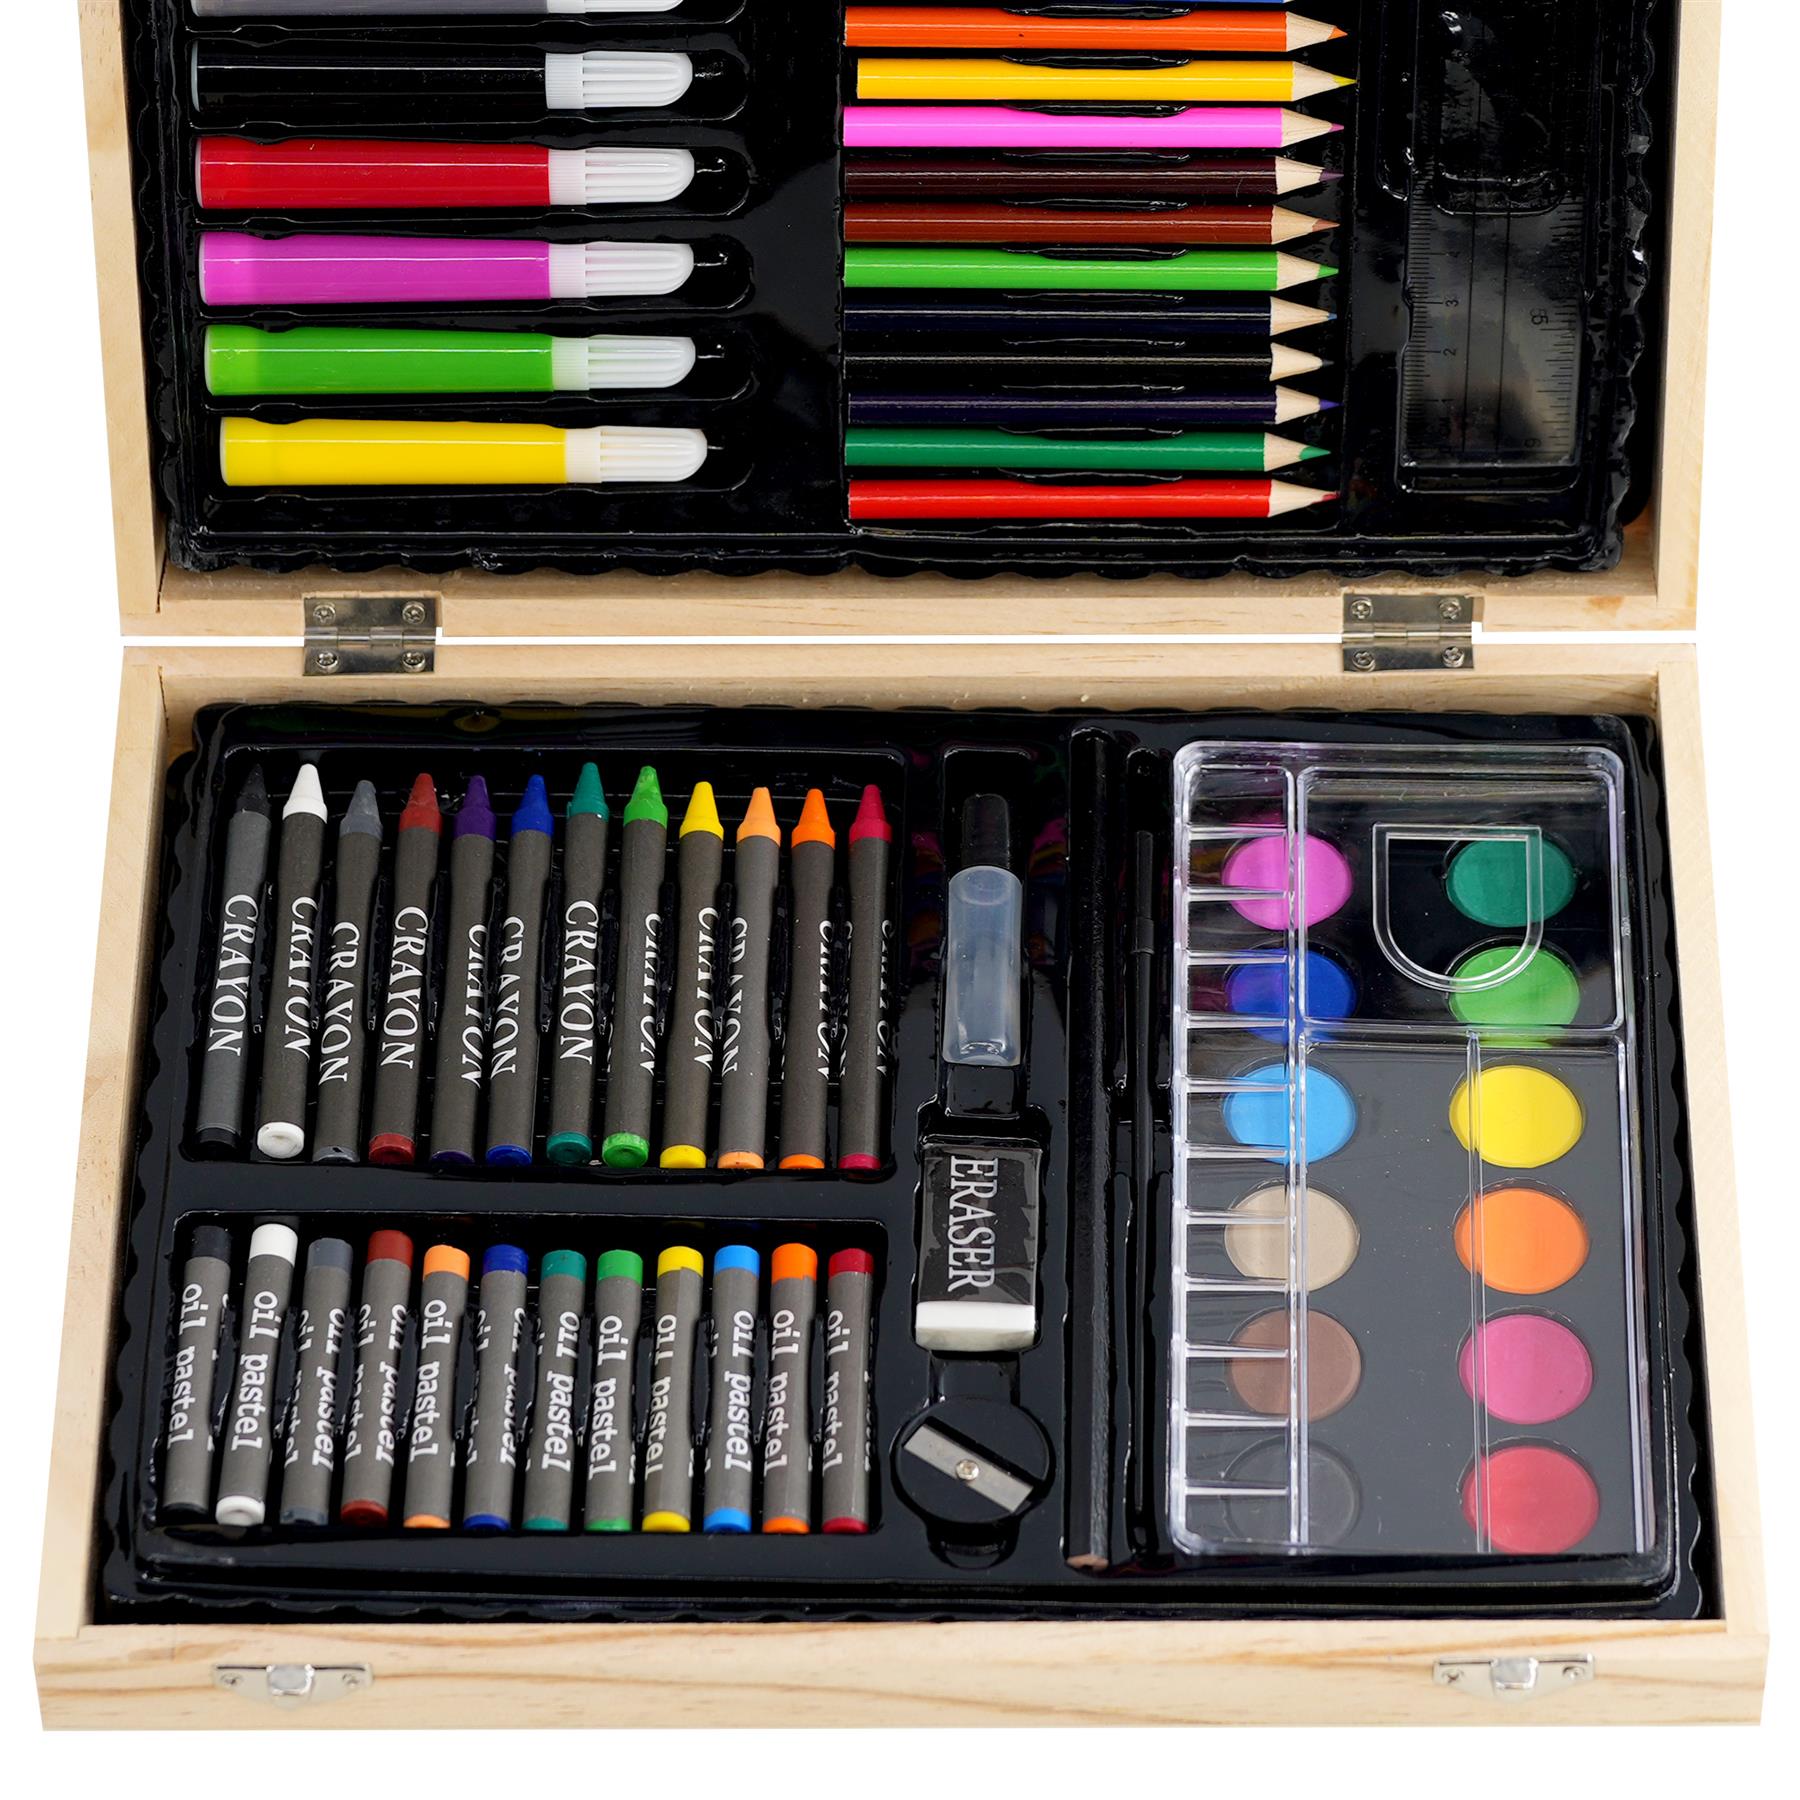 67 Pieces Art Set in a Wooden Case by The Magic Toy Shop - UKBuyZone